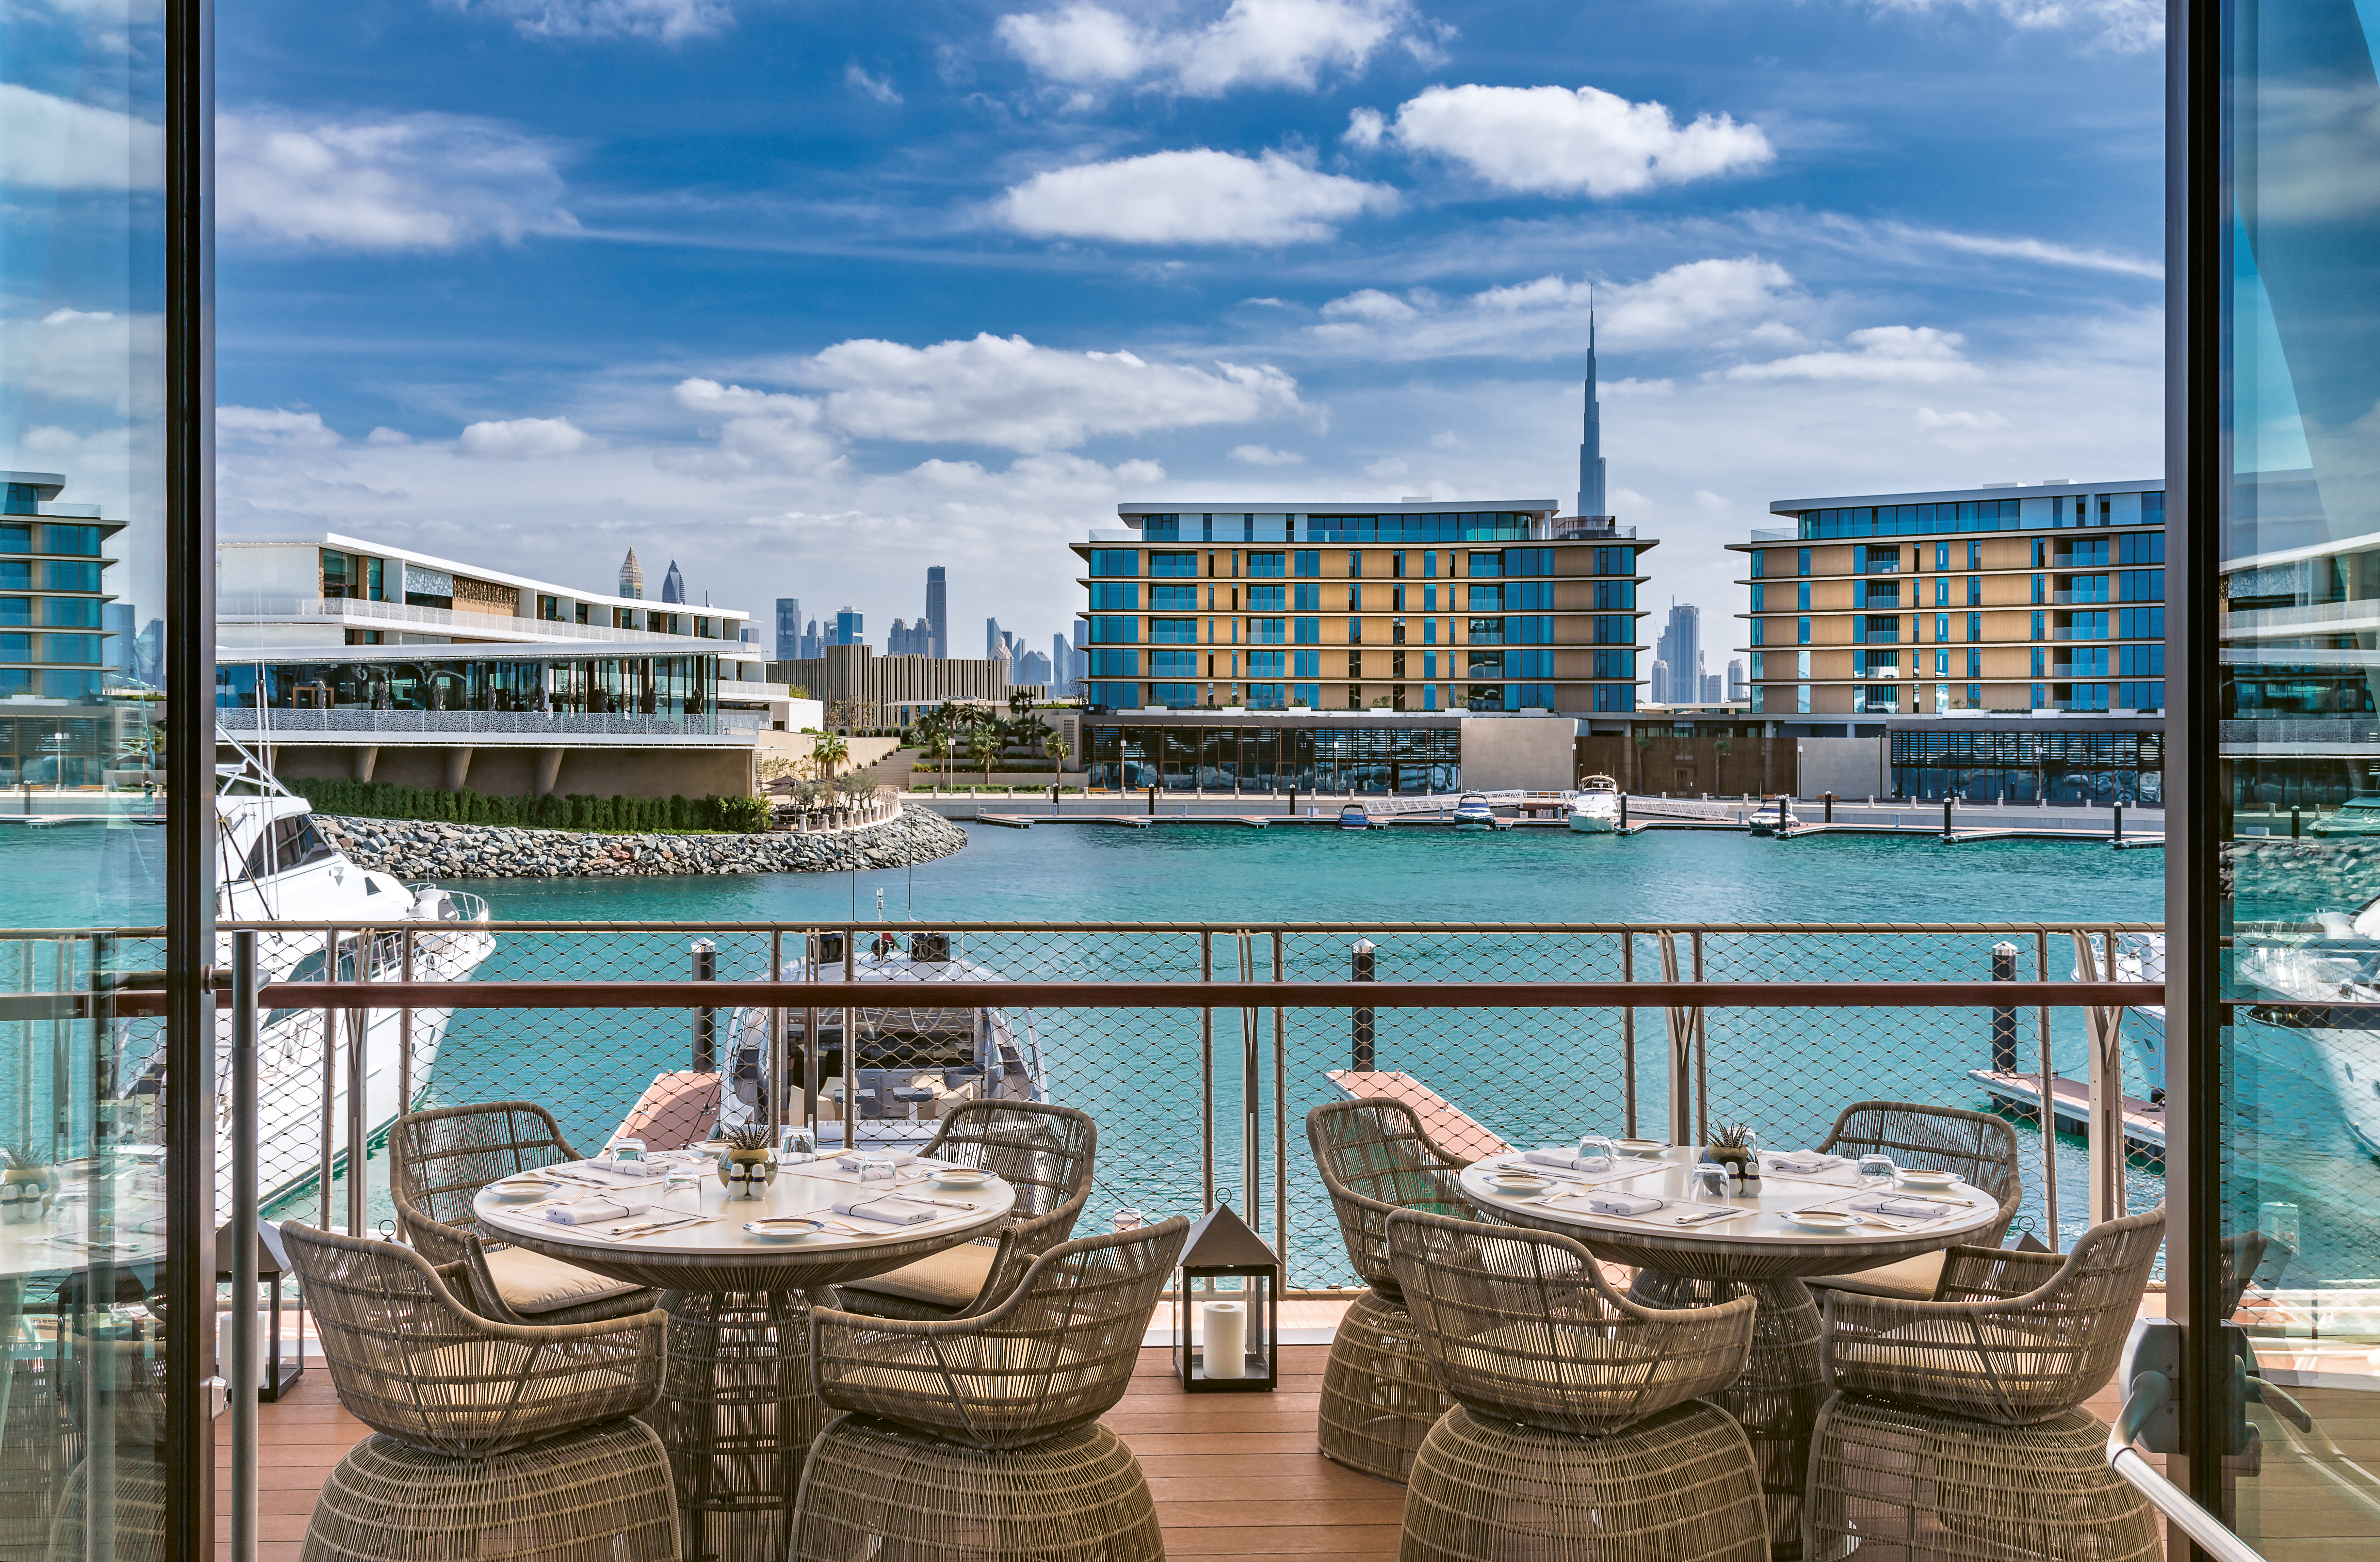 Yacht Club Brings A Touch Of Italy To Dubai